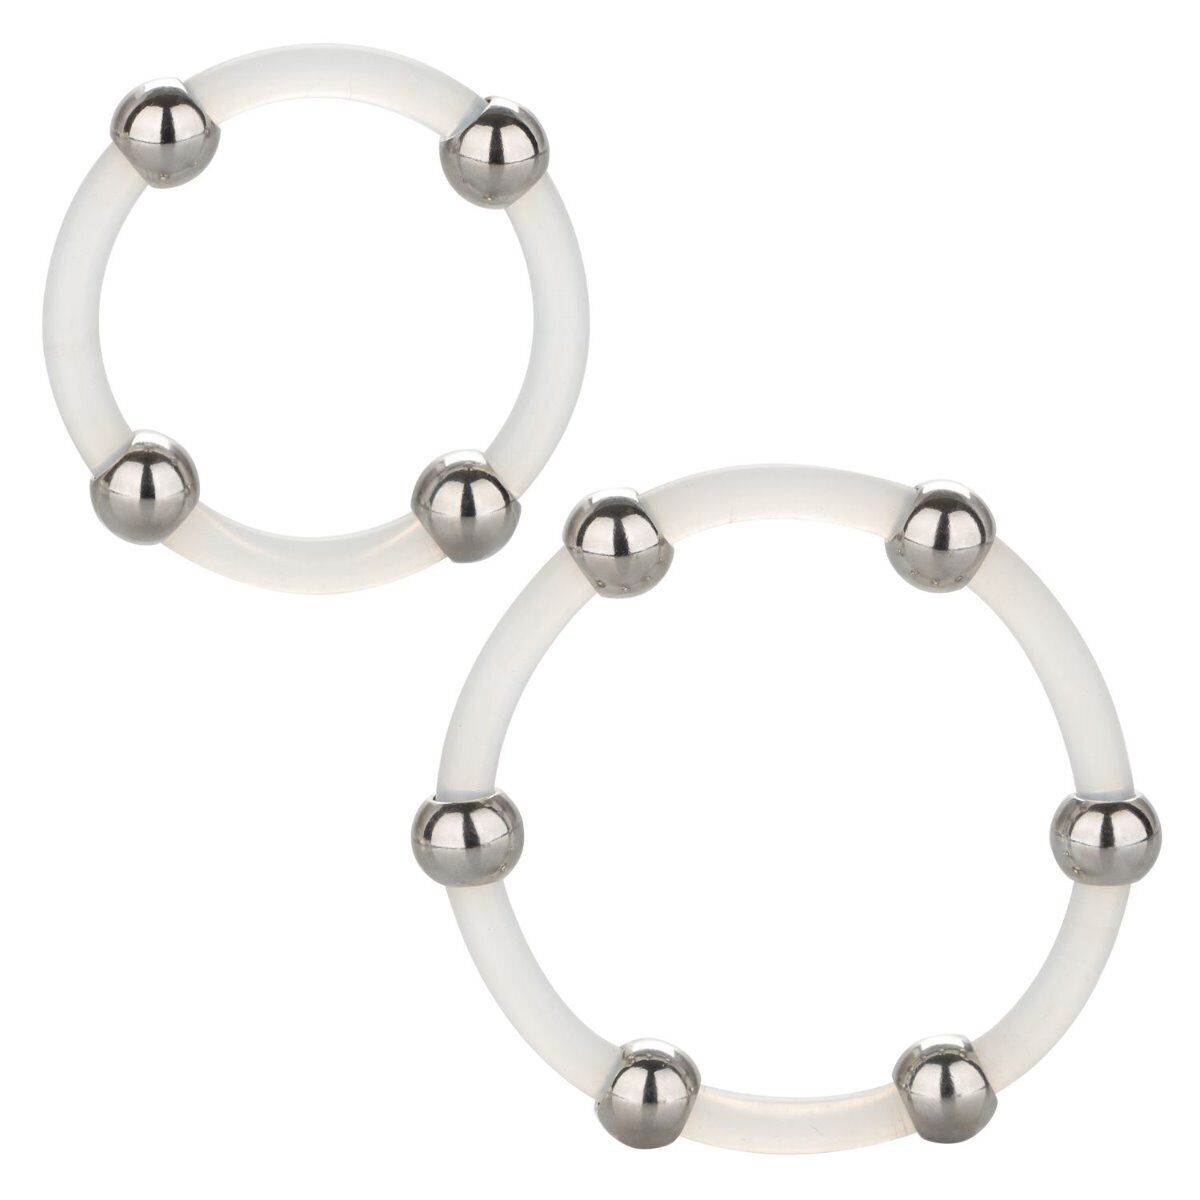 2 Stretchy Steel Beaded Silicone Penis Cock Rings Sex Toys for Men